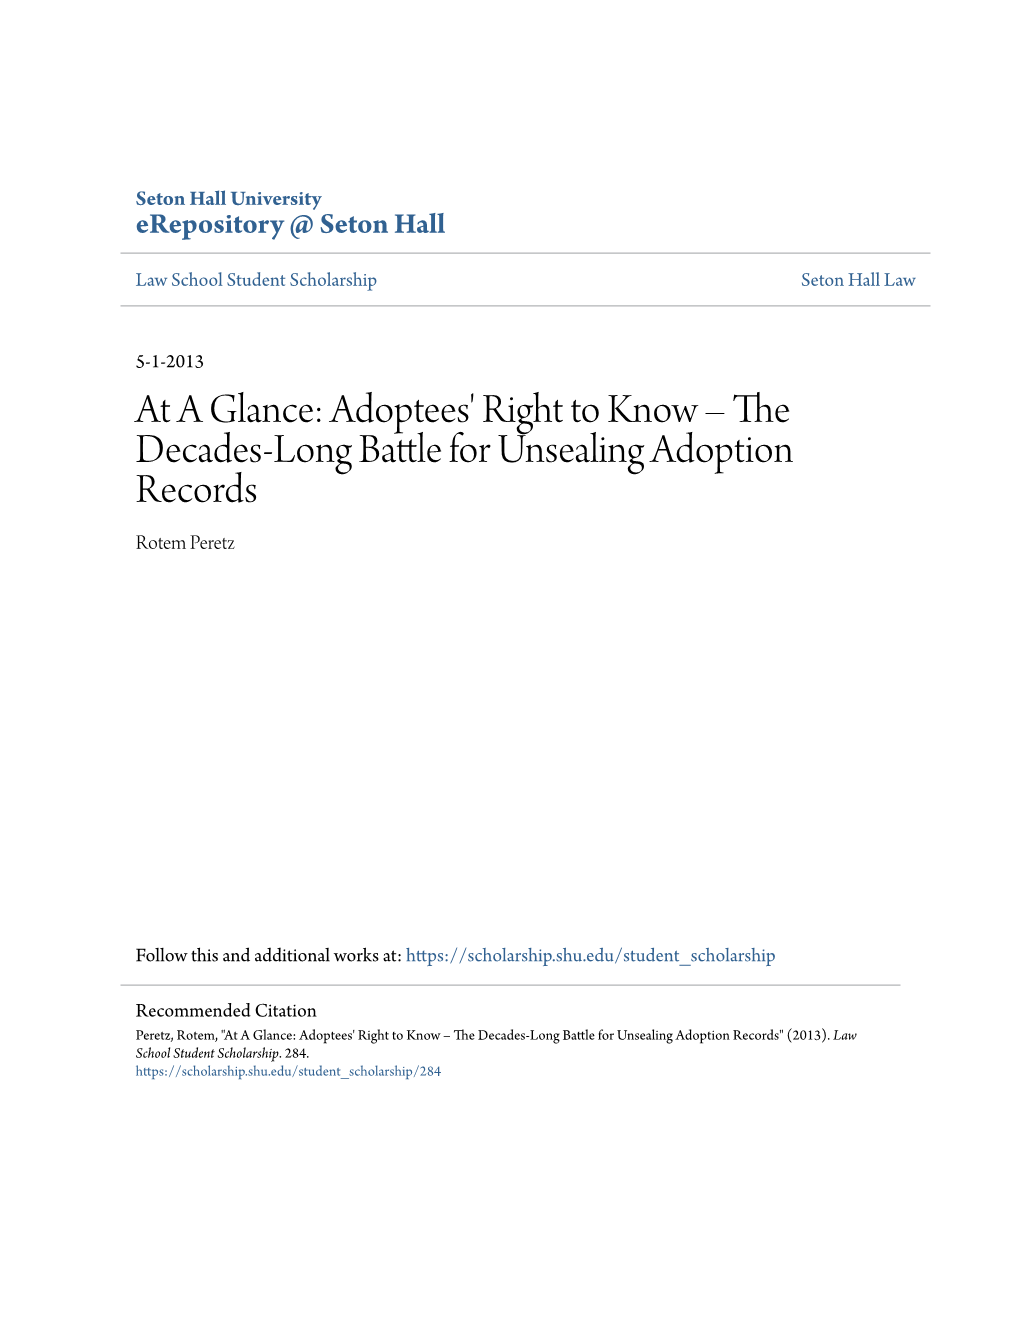 At a Glance: Adoptees' Right to Know Â•Fi the Decades-Long Battle for Unsealing Adoption Records